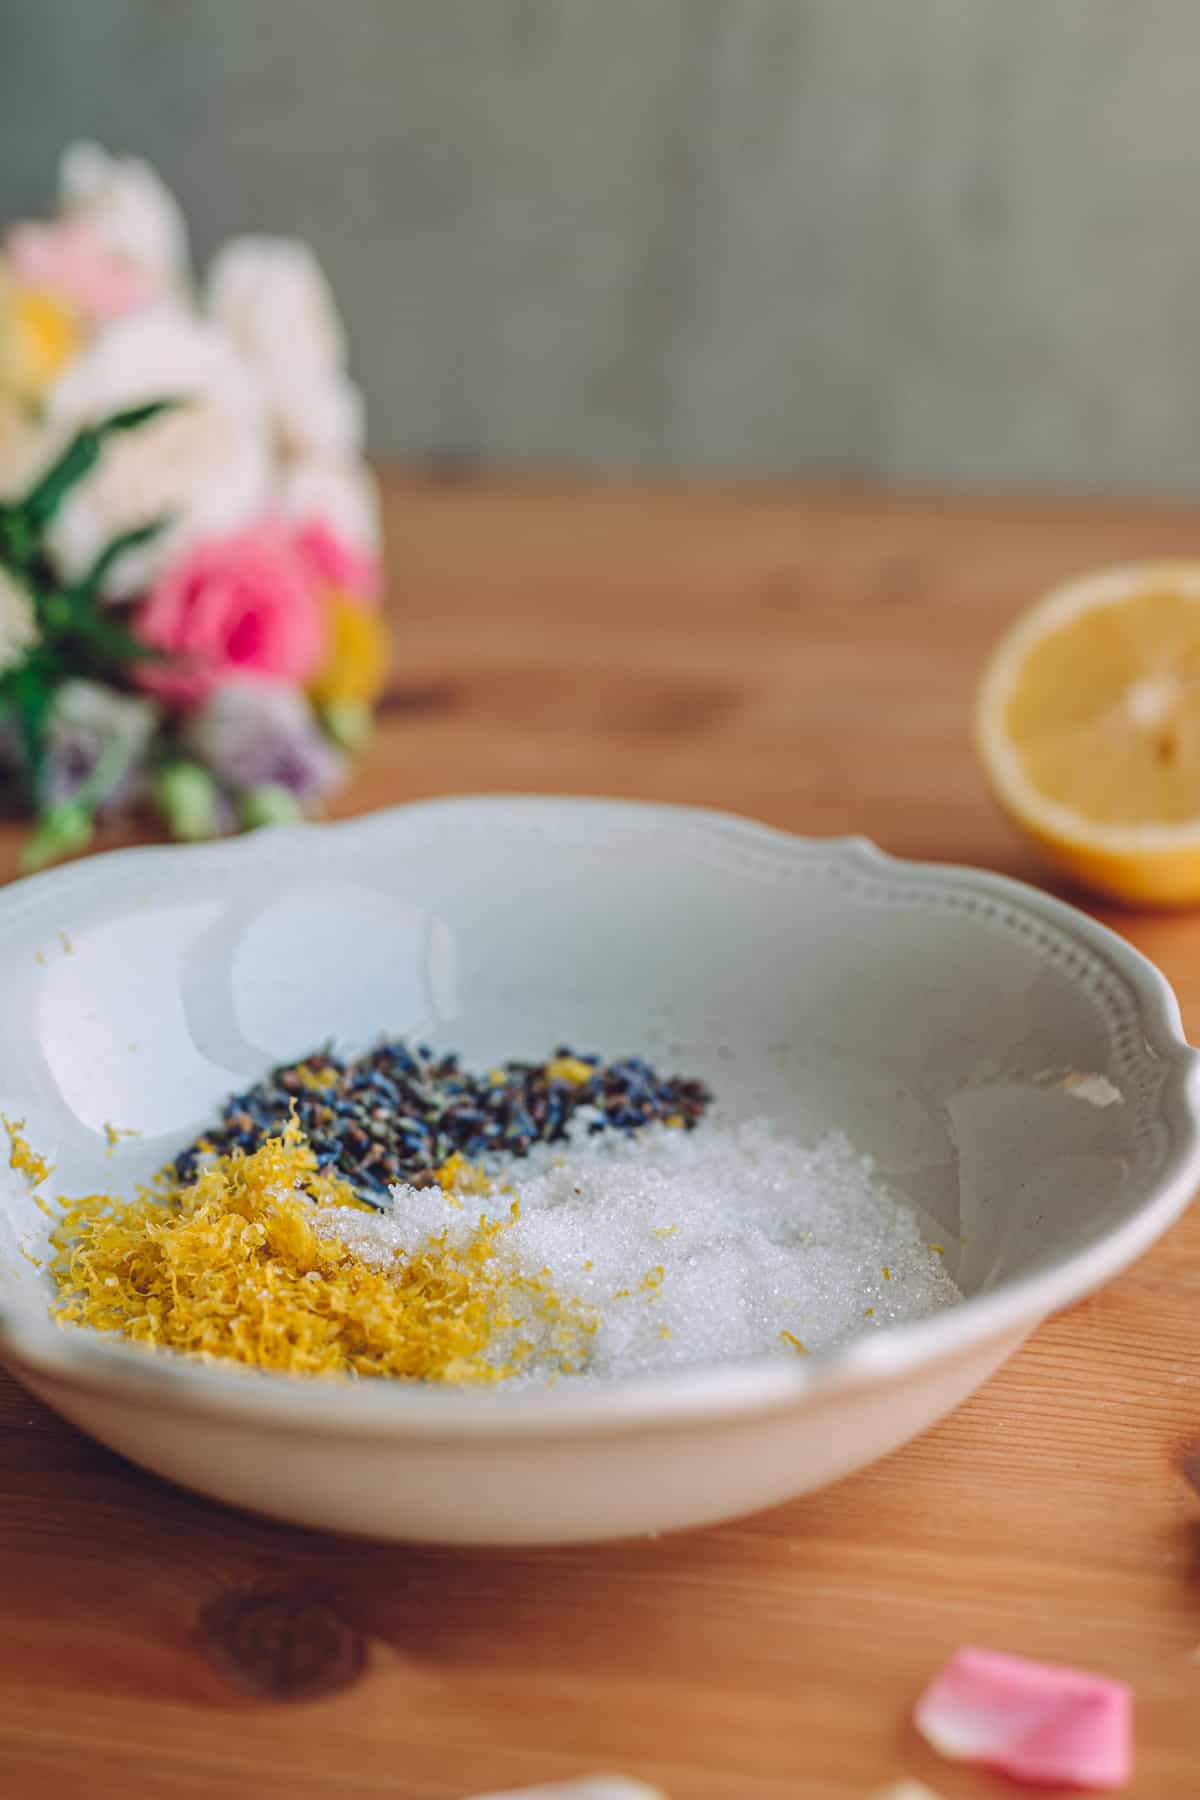 close up ornate white porcelain bowl filled with a scoop of white sugar, next to a scoop of lemon zest, next to a scoop of lavender buds